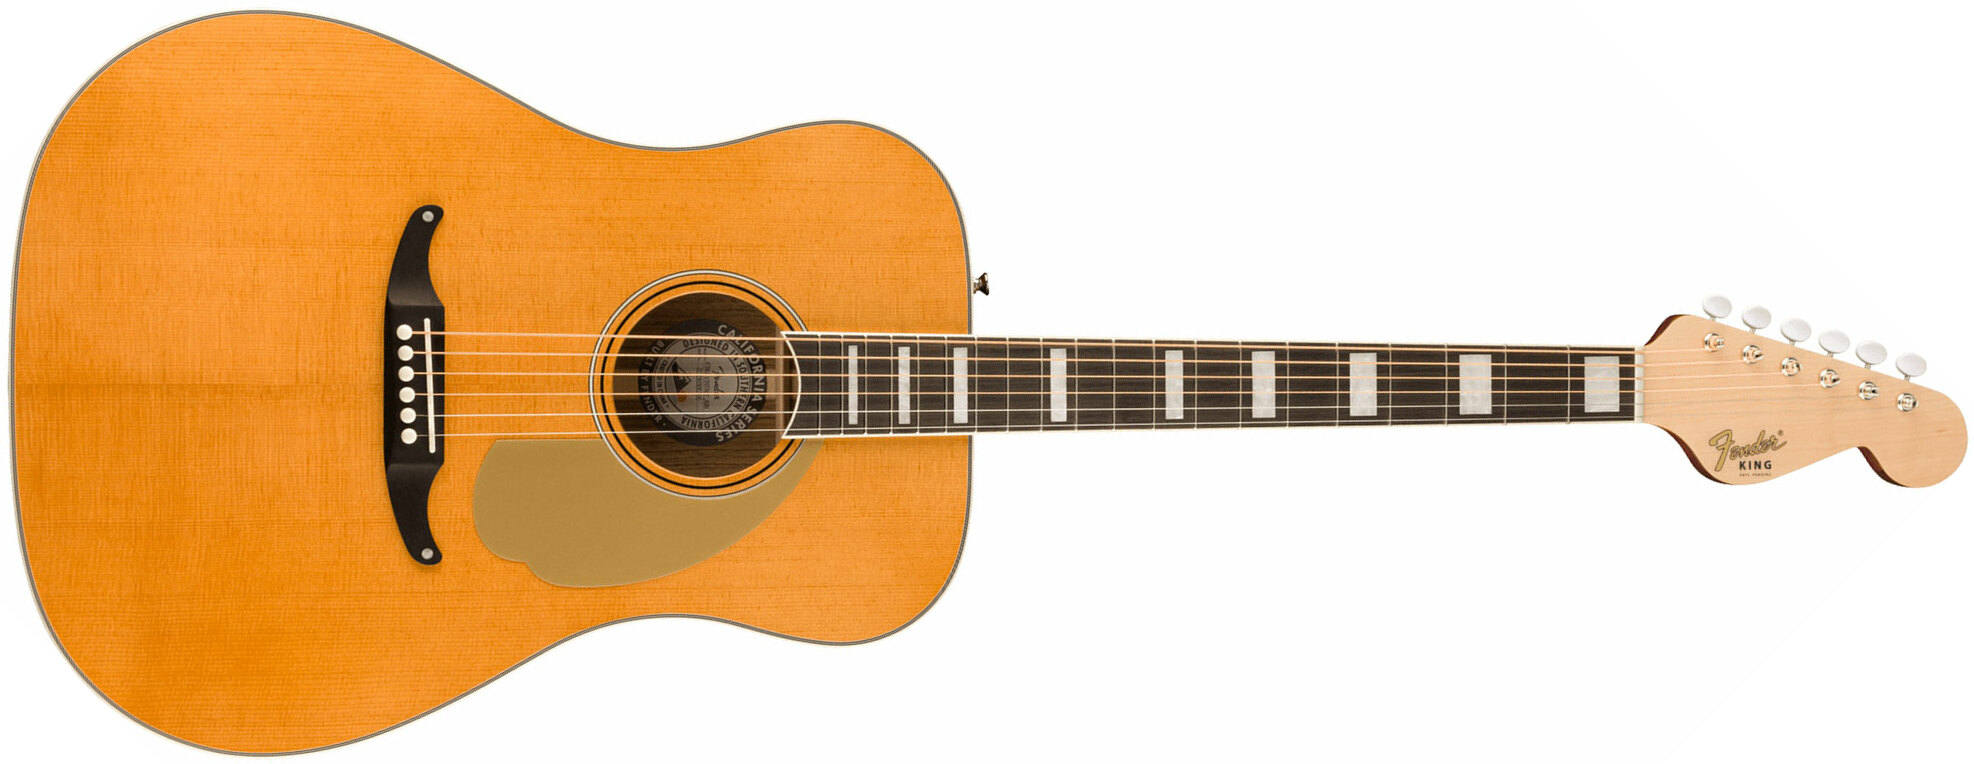 Fender King Vintage California Dreadnought Epicea Ovangkol Ova - Aged Natural - Electro acoustic guitar - Main picture